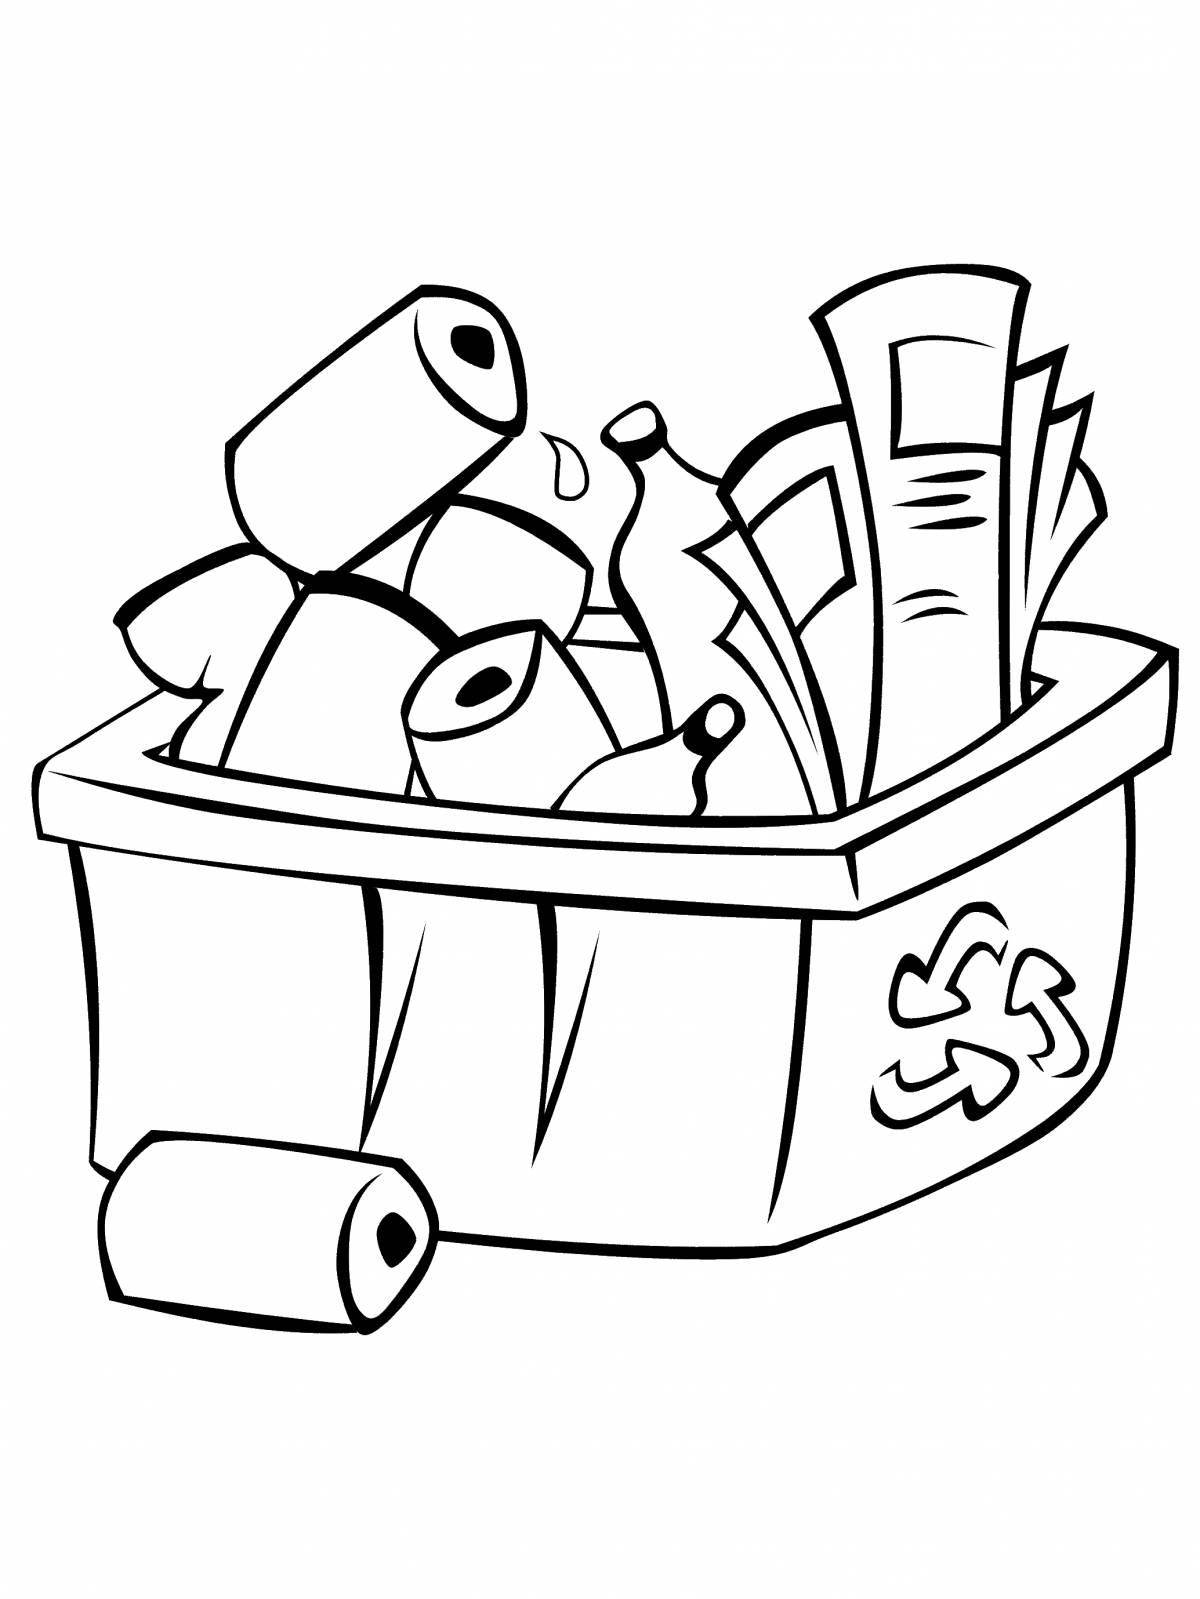 Colorful garbage sorting coloring page